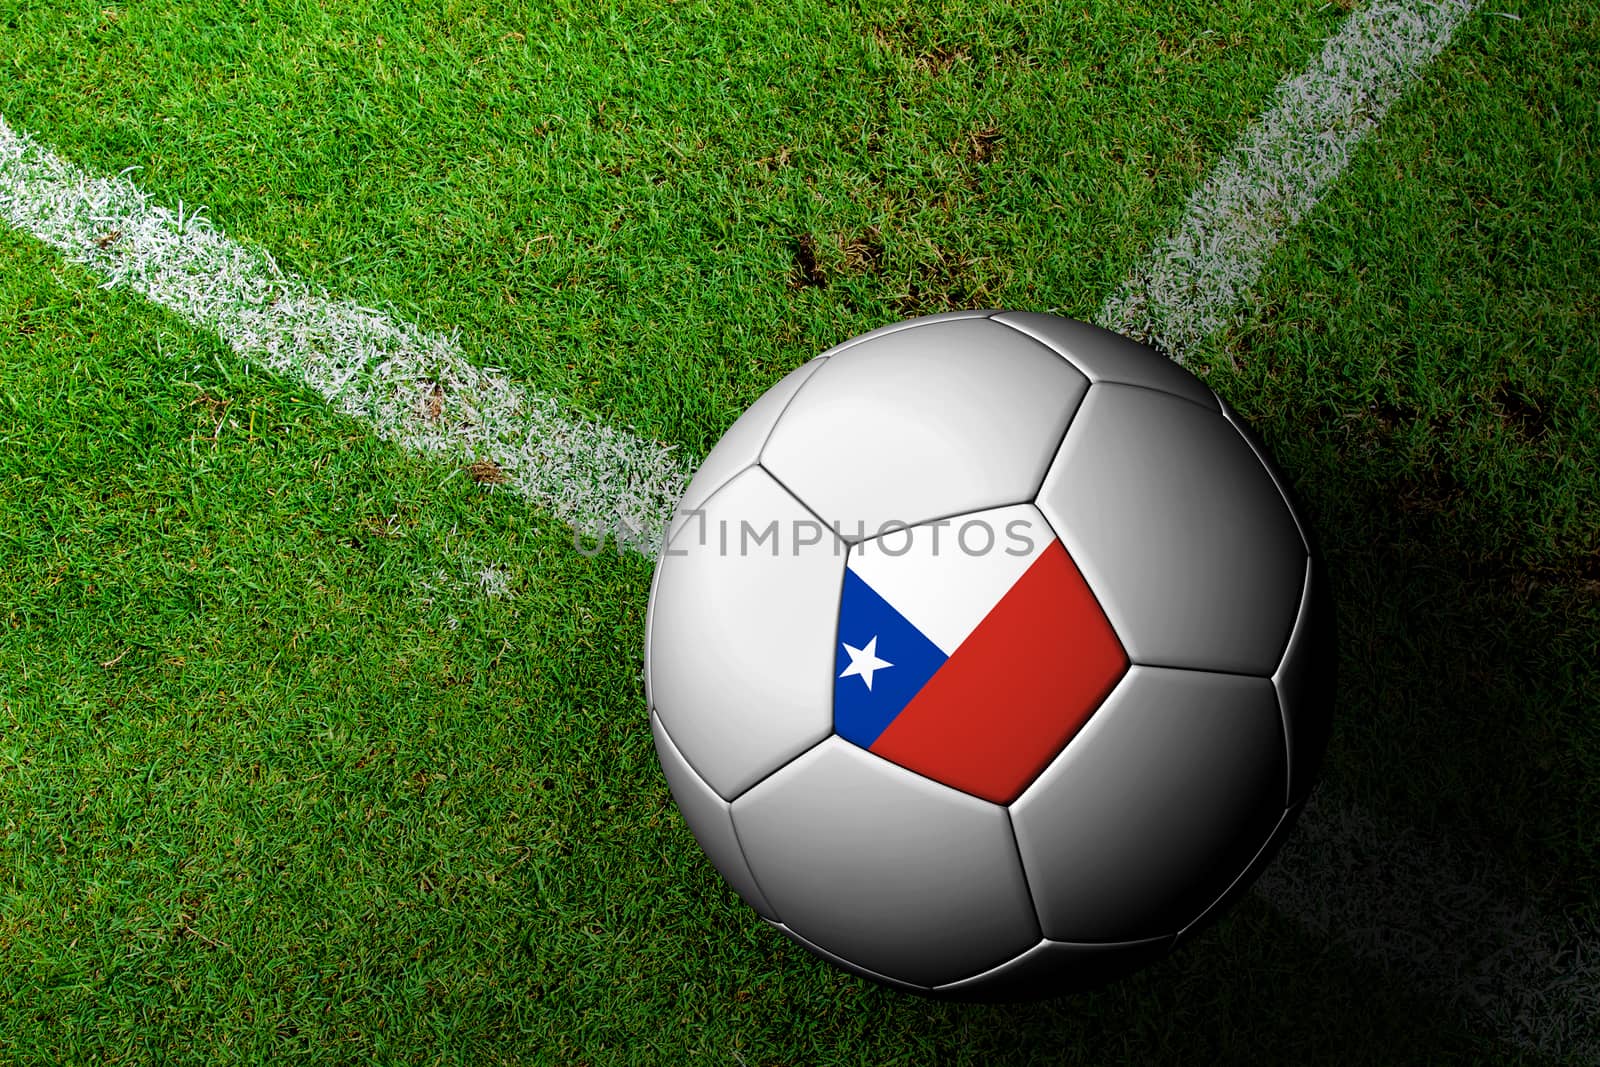 Chile Flag Pattern of a soccer ball in green grass